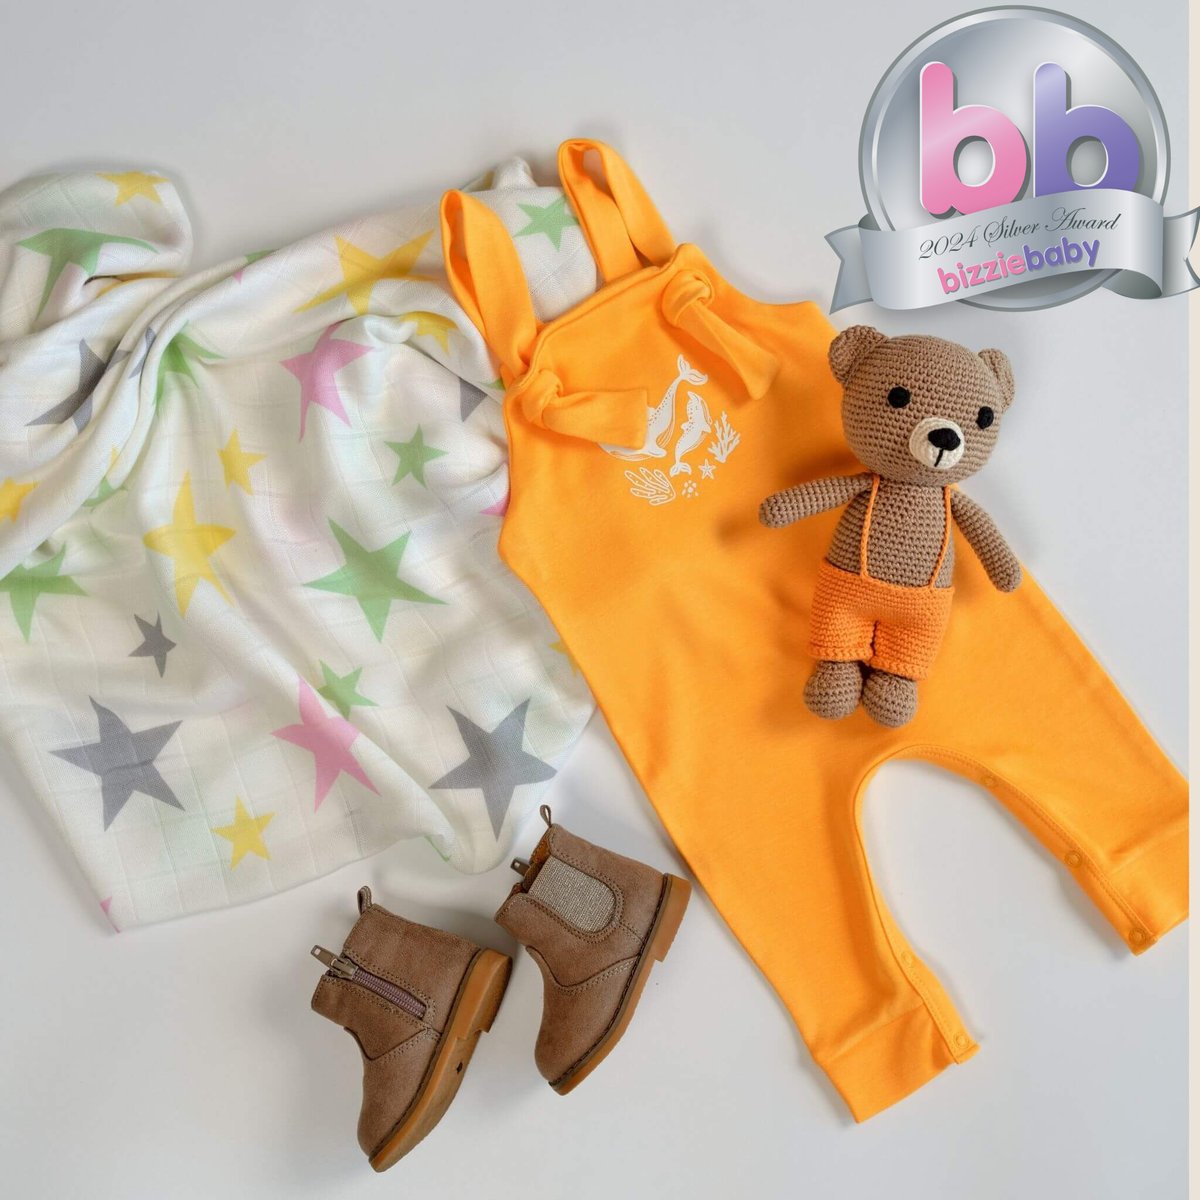 Bebekish Baby Dino Organic Baby Dungaree - Organic,soft and gentle on infants skin and easy to use and LOVED by our #Bizziebabytesters.  #bizziebabysilverawardwinner2024 bizziebaby.co.uk/product-review…
Buy Here bebekish.com/products/seaho…
@BebekishL